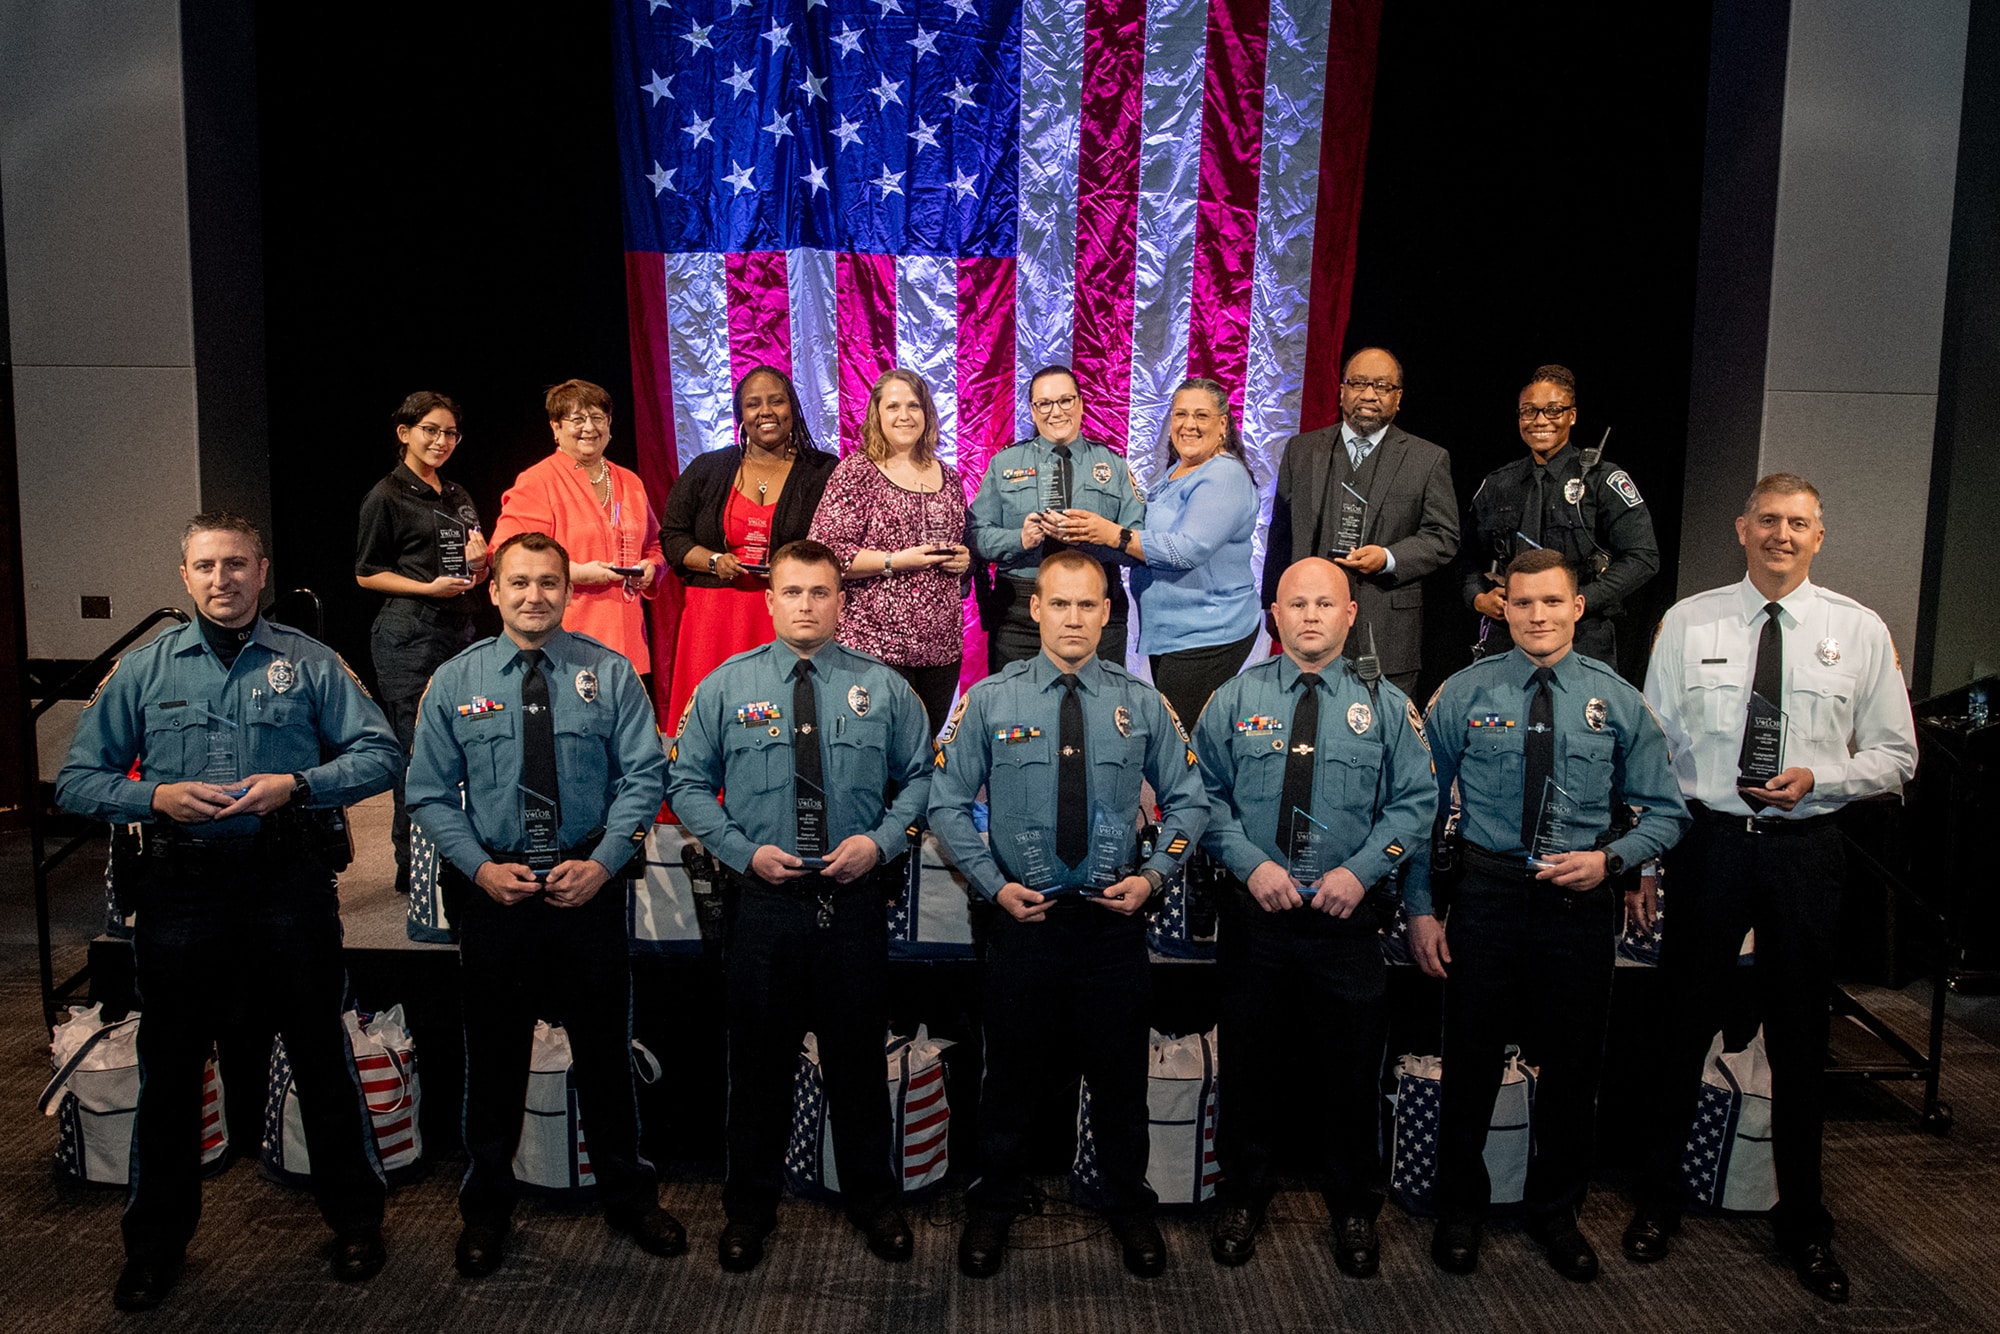 Gwinnett County public servants honored at 2021 Valor Public Safety Awards